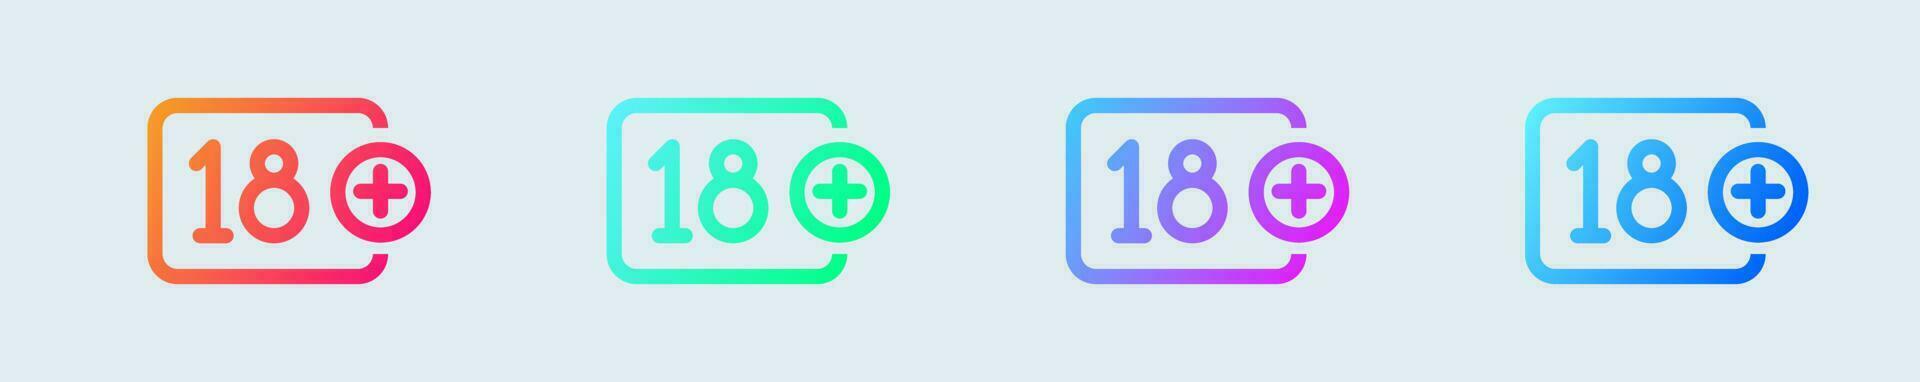 Age restriction line icon in gradient colors. Adult signs vector illustration.